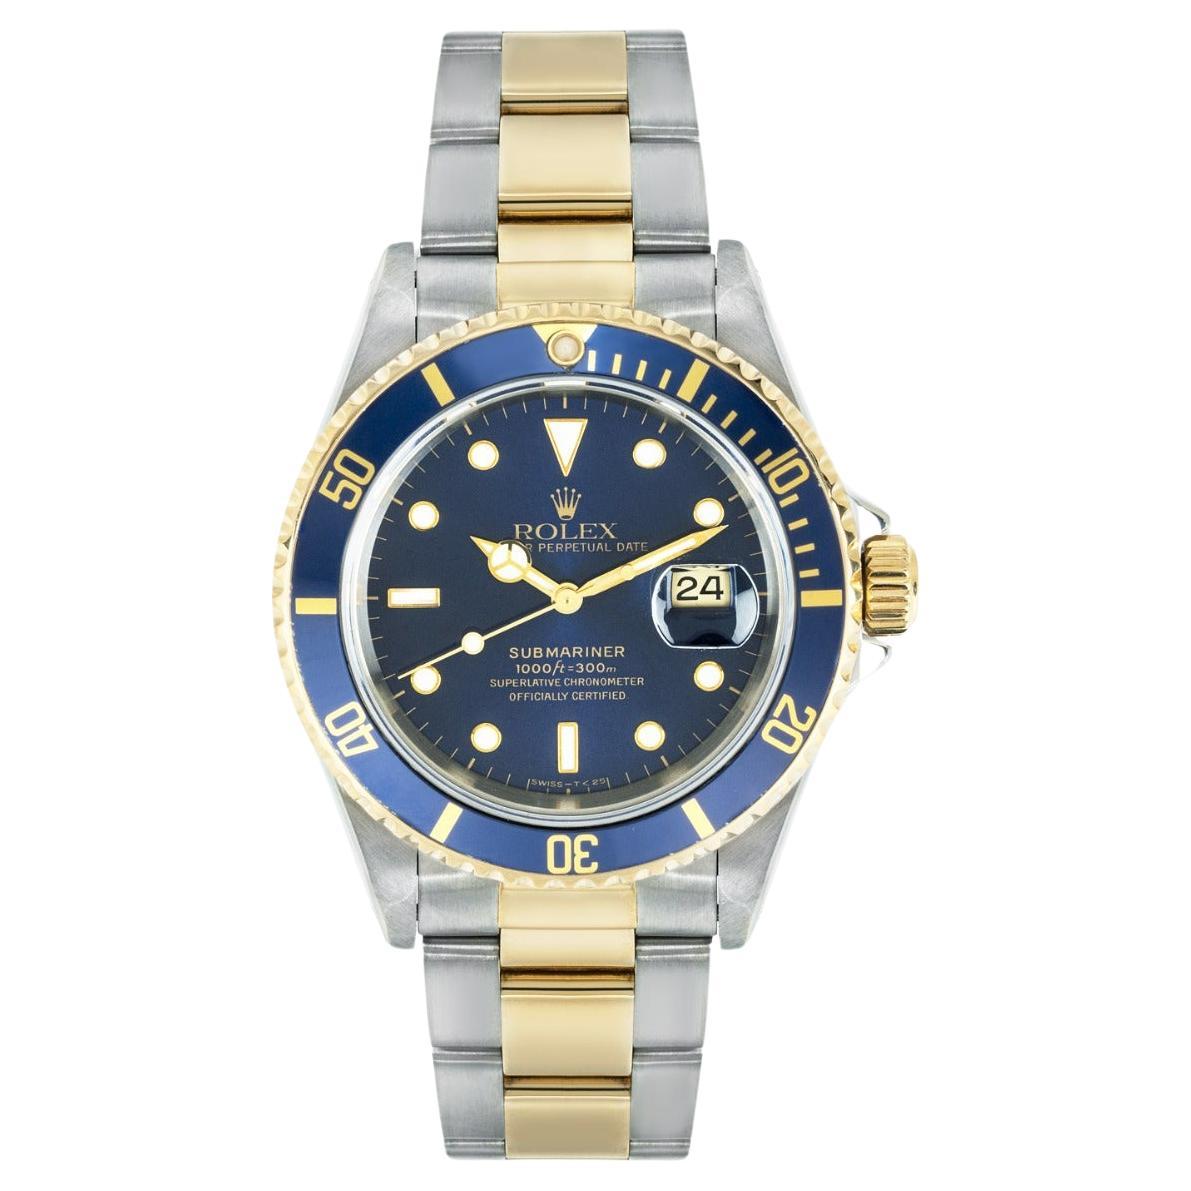 Where can I buy a pre-owned Rolex?